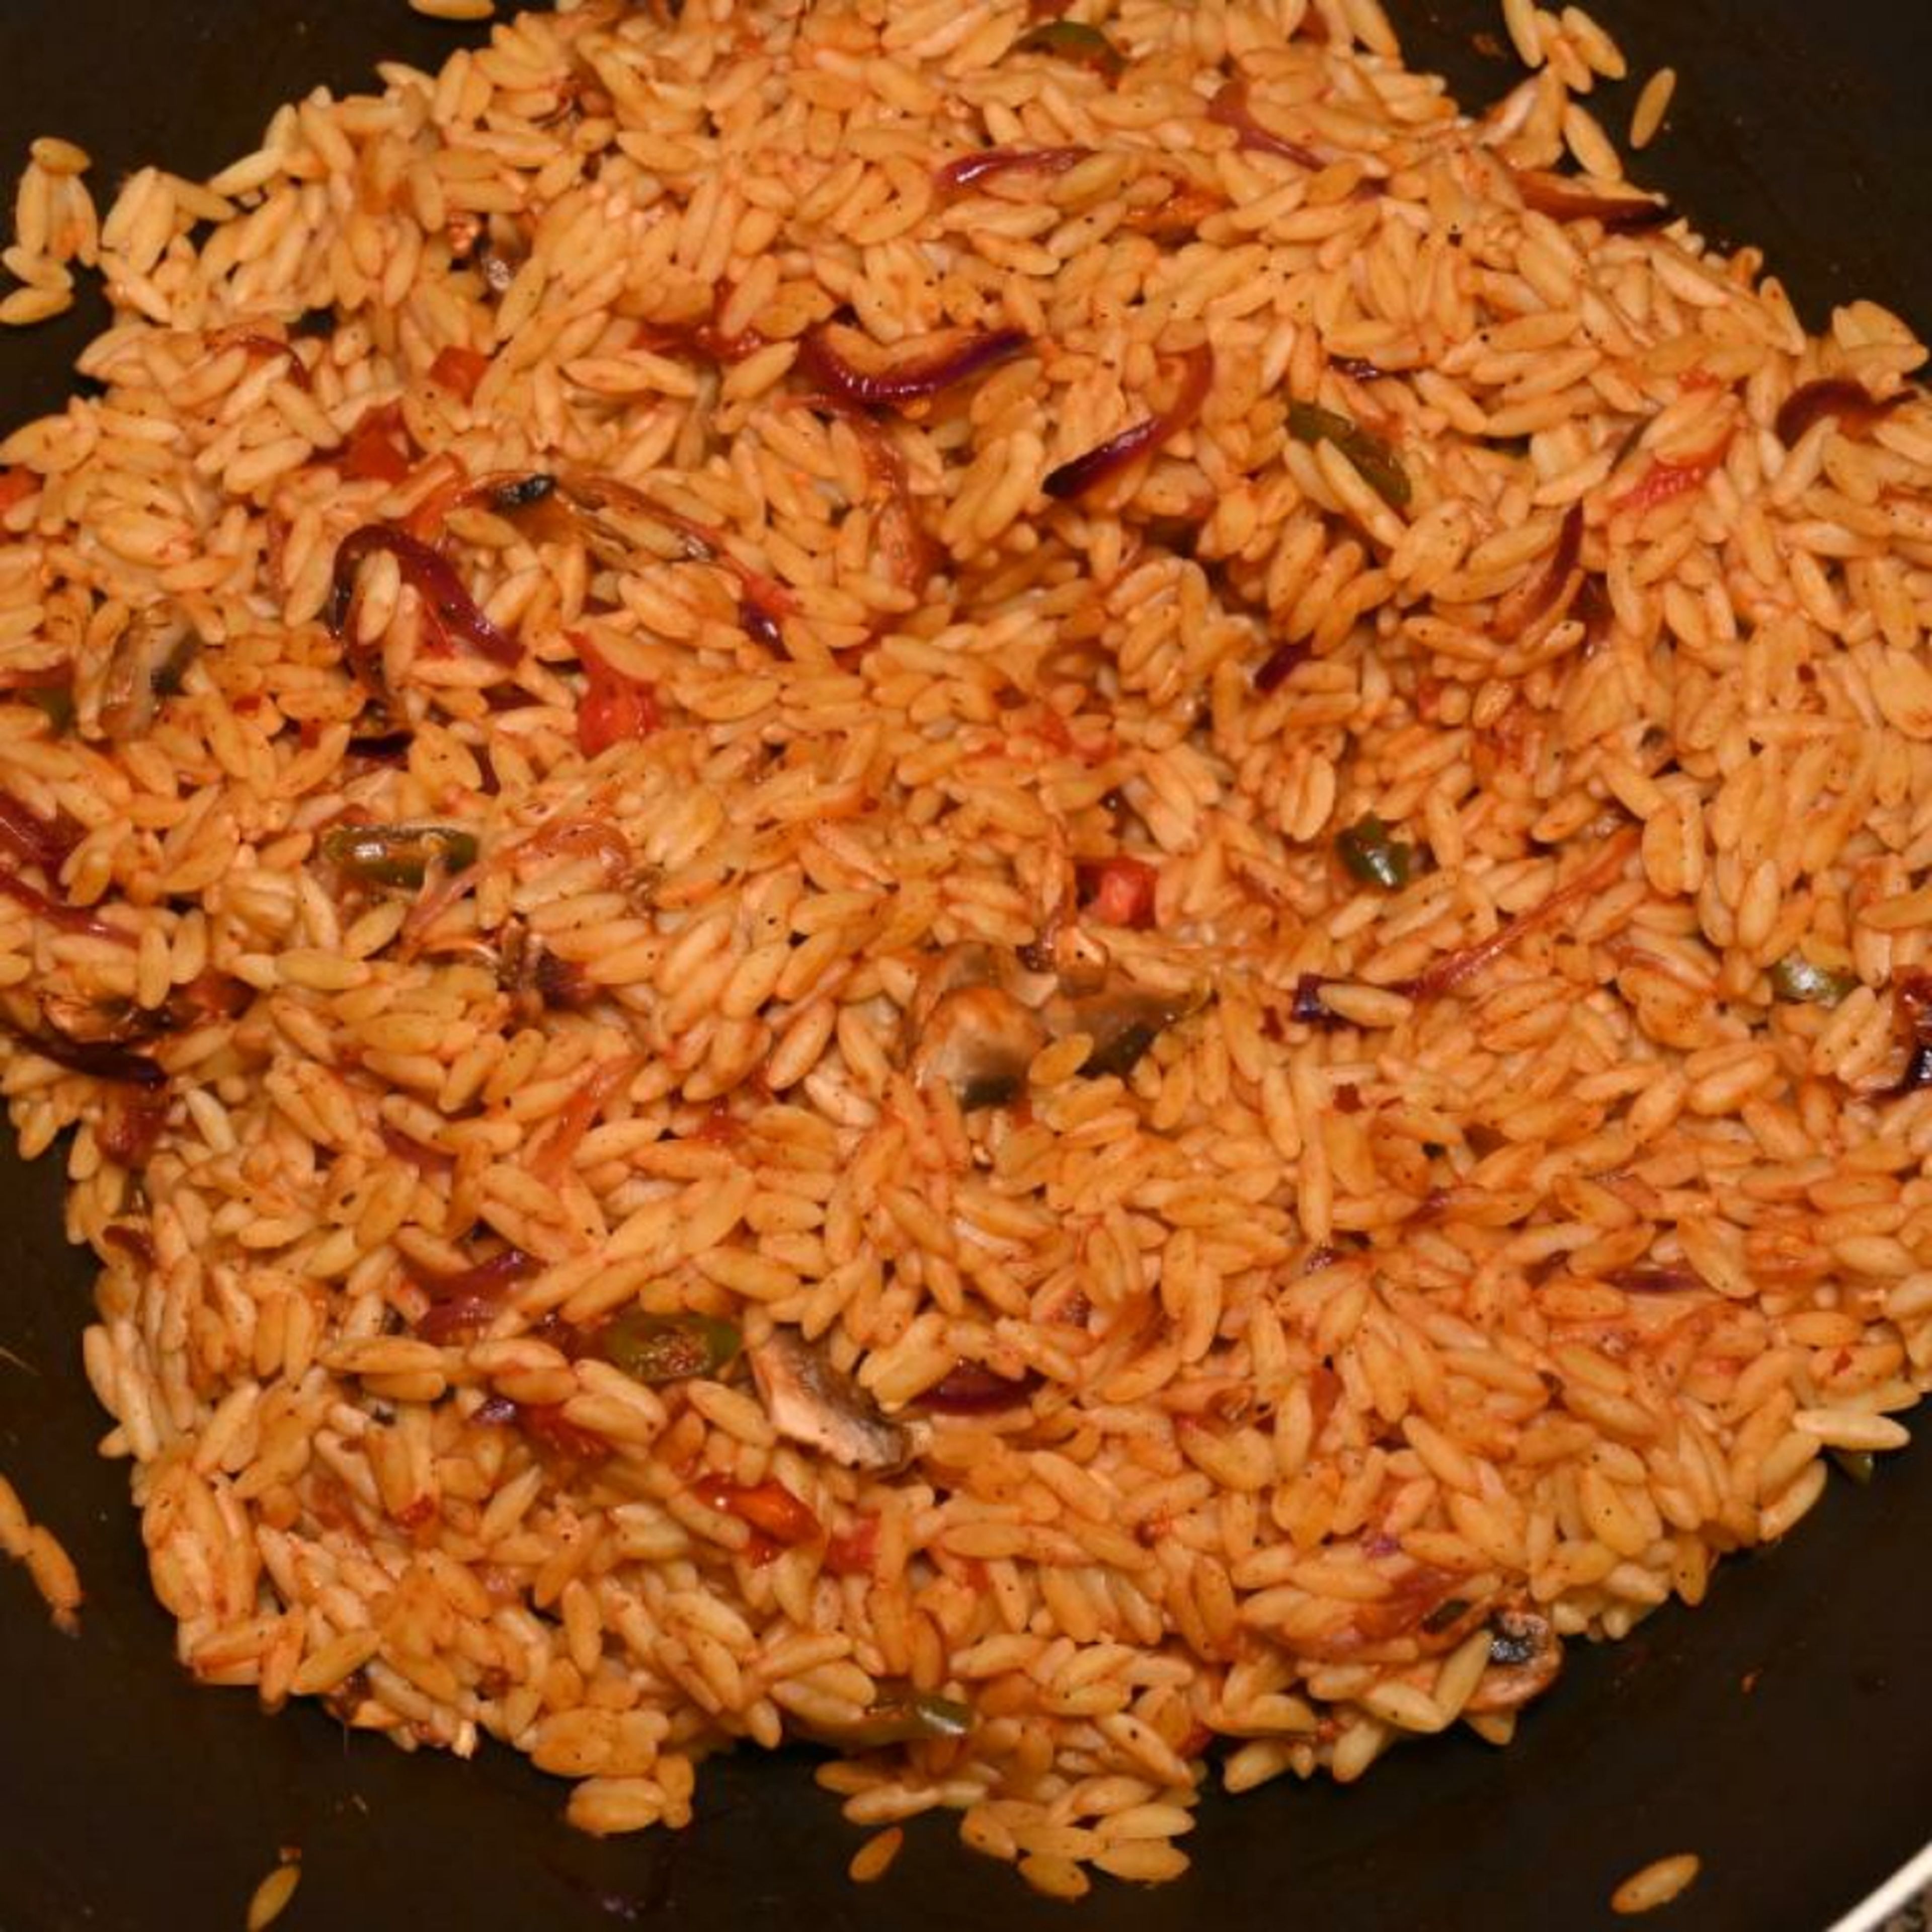 Add the cooked Orzo pasta to the wok containing all the spices, mushrooms, tomatoes, and mix to combine all the ingredients.